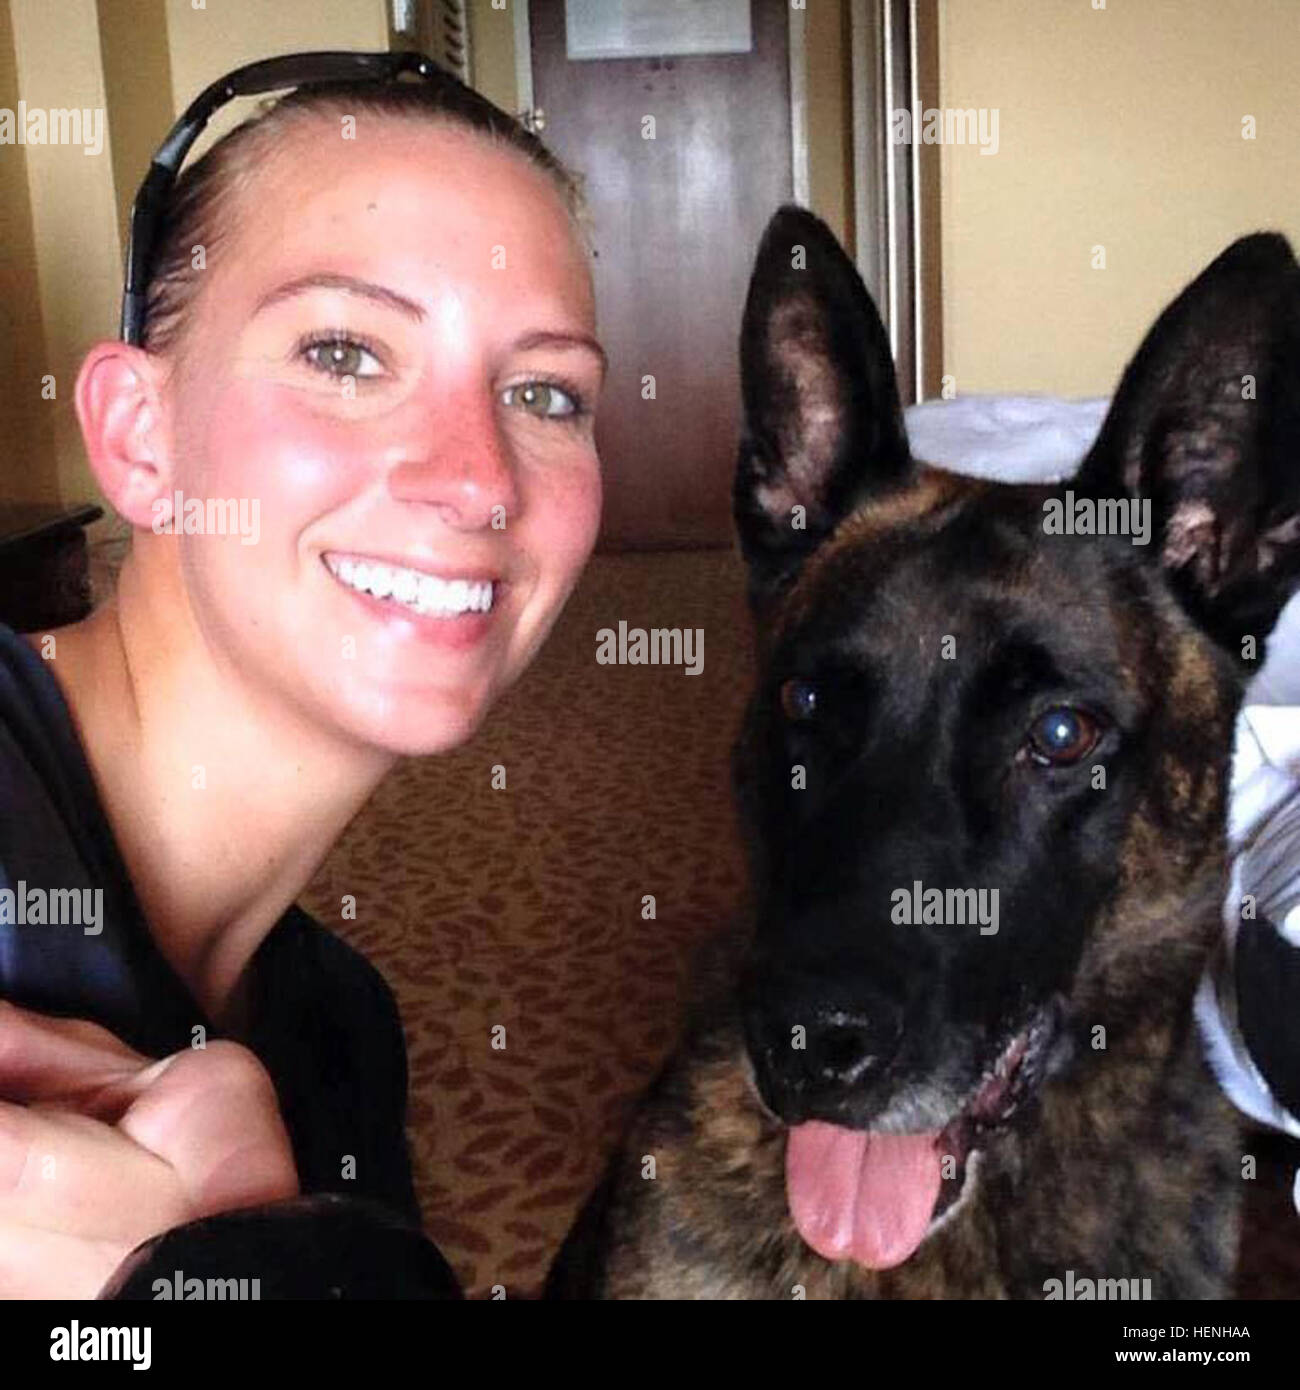 Patrol Explosive Detector Dog, Kobus and Sgt. Holly Moore, 550th Military Working Dog Detachment, 16th Military Police Brigade, take a selfie after a long day of explosive detection sweeps as part of a secret service mission when President Barack Obama spoke at the West Point graduation in New York, May 27, 2014. Moore and Kobus began their partnership in 2013 on Valentine’s Day, serving on many law enforcement missions and one deployment to Afghanistan before Kobus passed suddenly from cancer, March 11, 2015. Two years’ worth of long hours by one another’s sides forged a strong, selfless and  Stock Photo